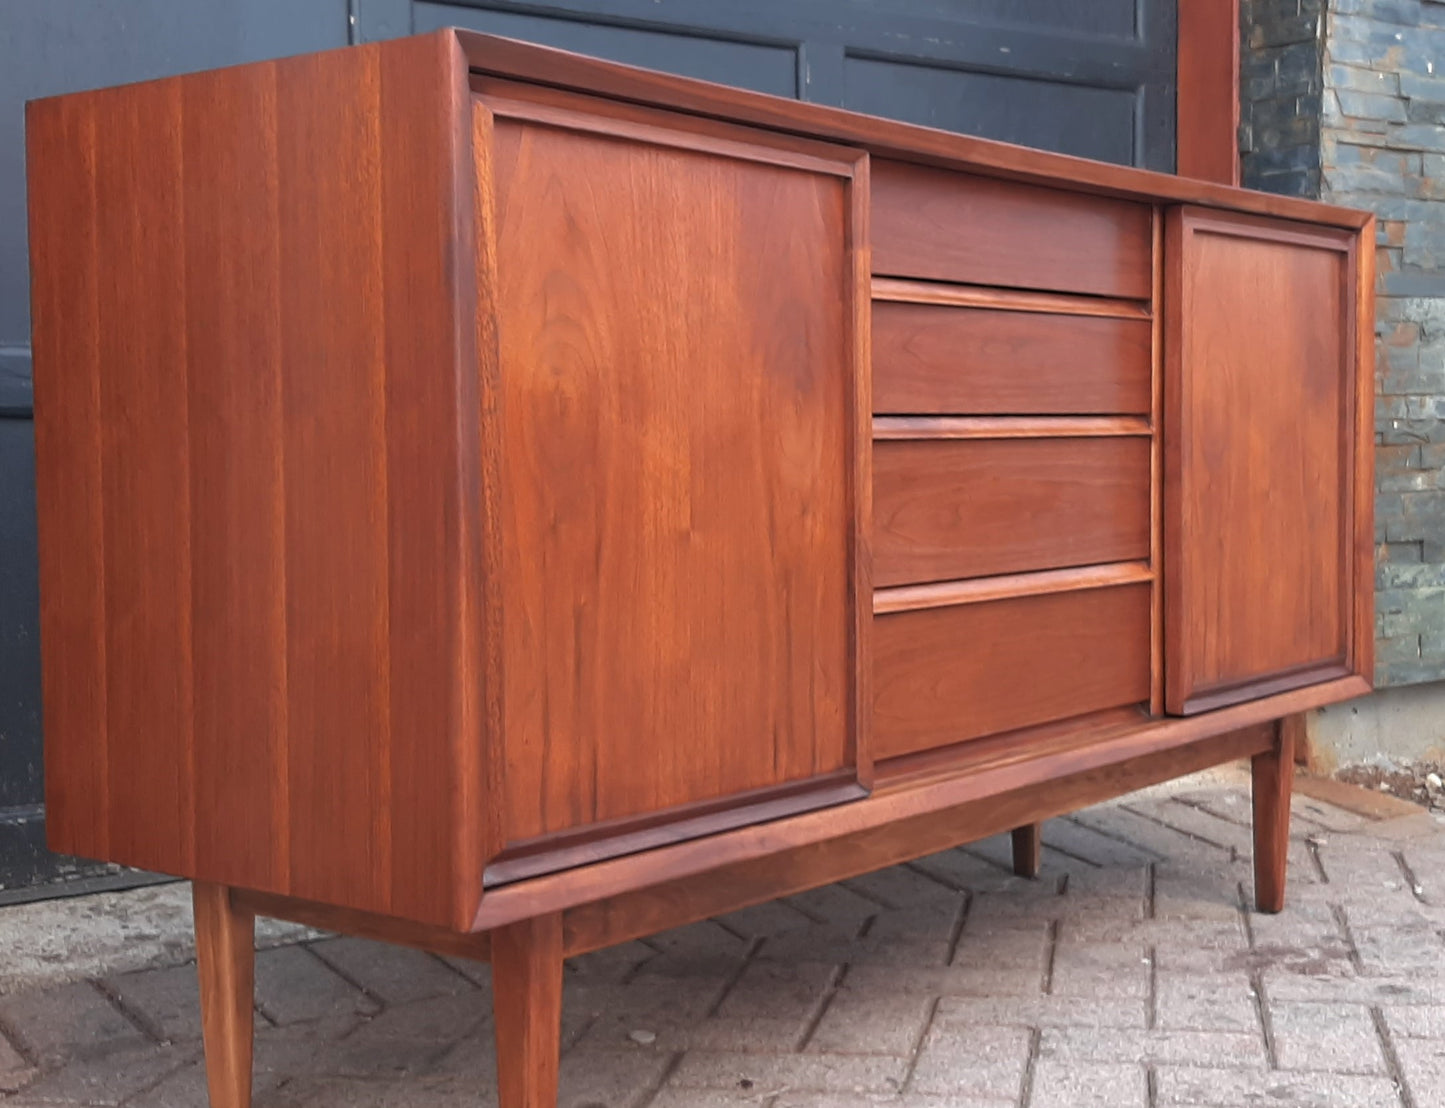 REFINISHED  MCM Walnut Sideboard Buffet 56.5" by Honderich , PERFECT